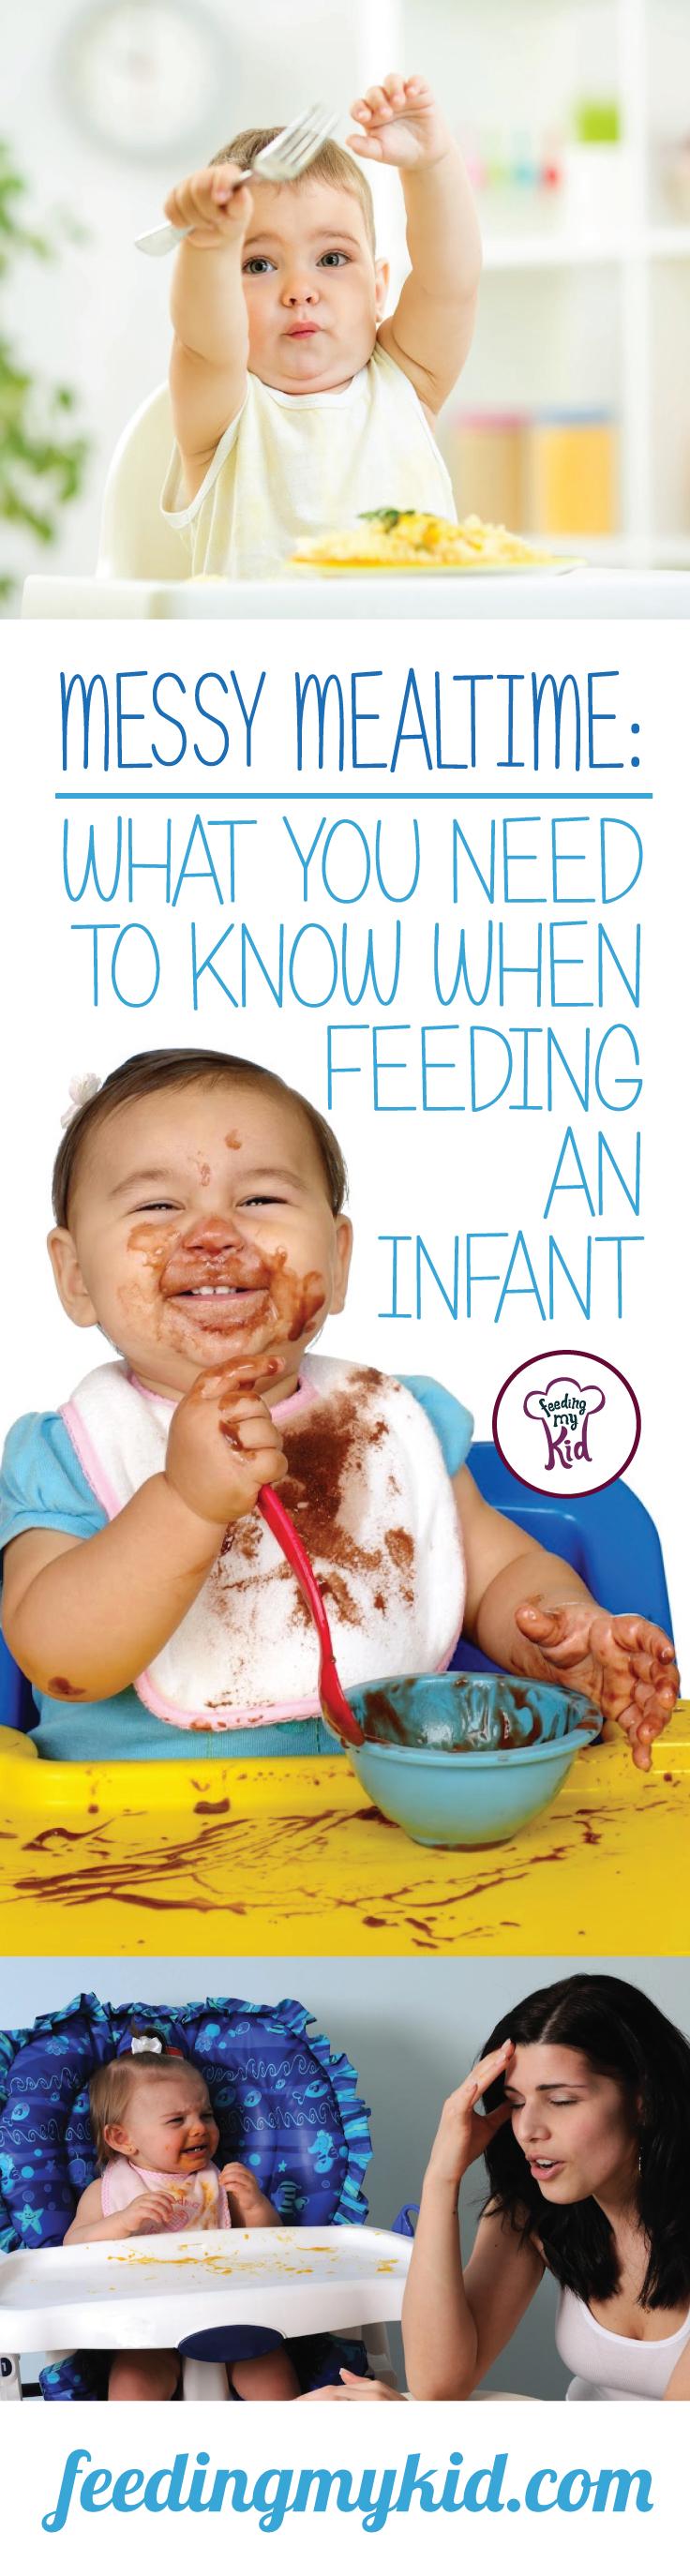 Learn exactly what you need to know about feeding an infant. Messy mealtimes are normal. So learn how to live with a messy baby. This is a must read. Feeding My Kid is a filled with all the information you need about how to raise your kids, from healthy tips to nutritious recipes. #fmk #parenting 